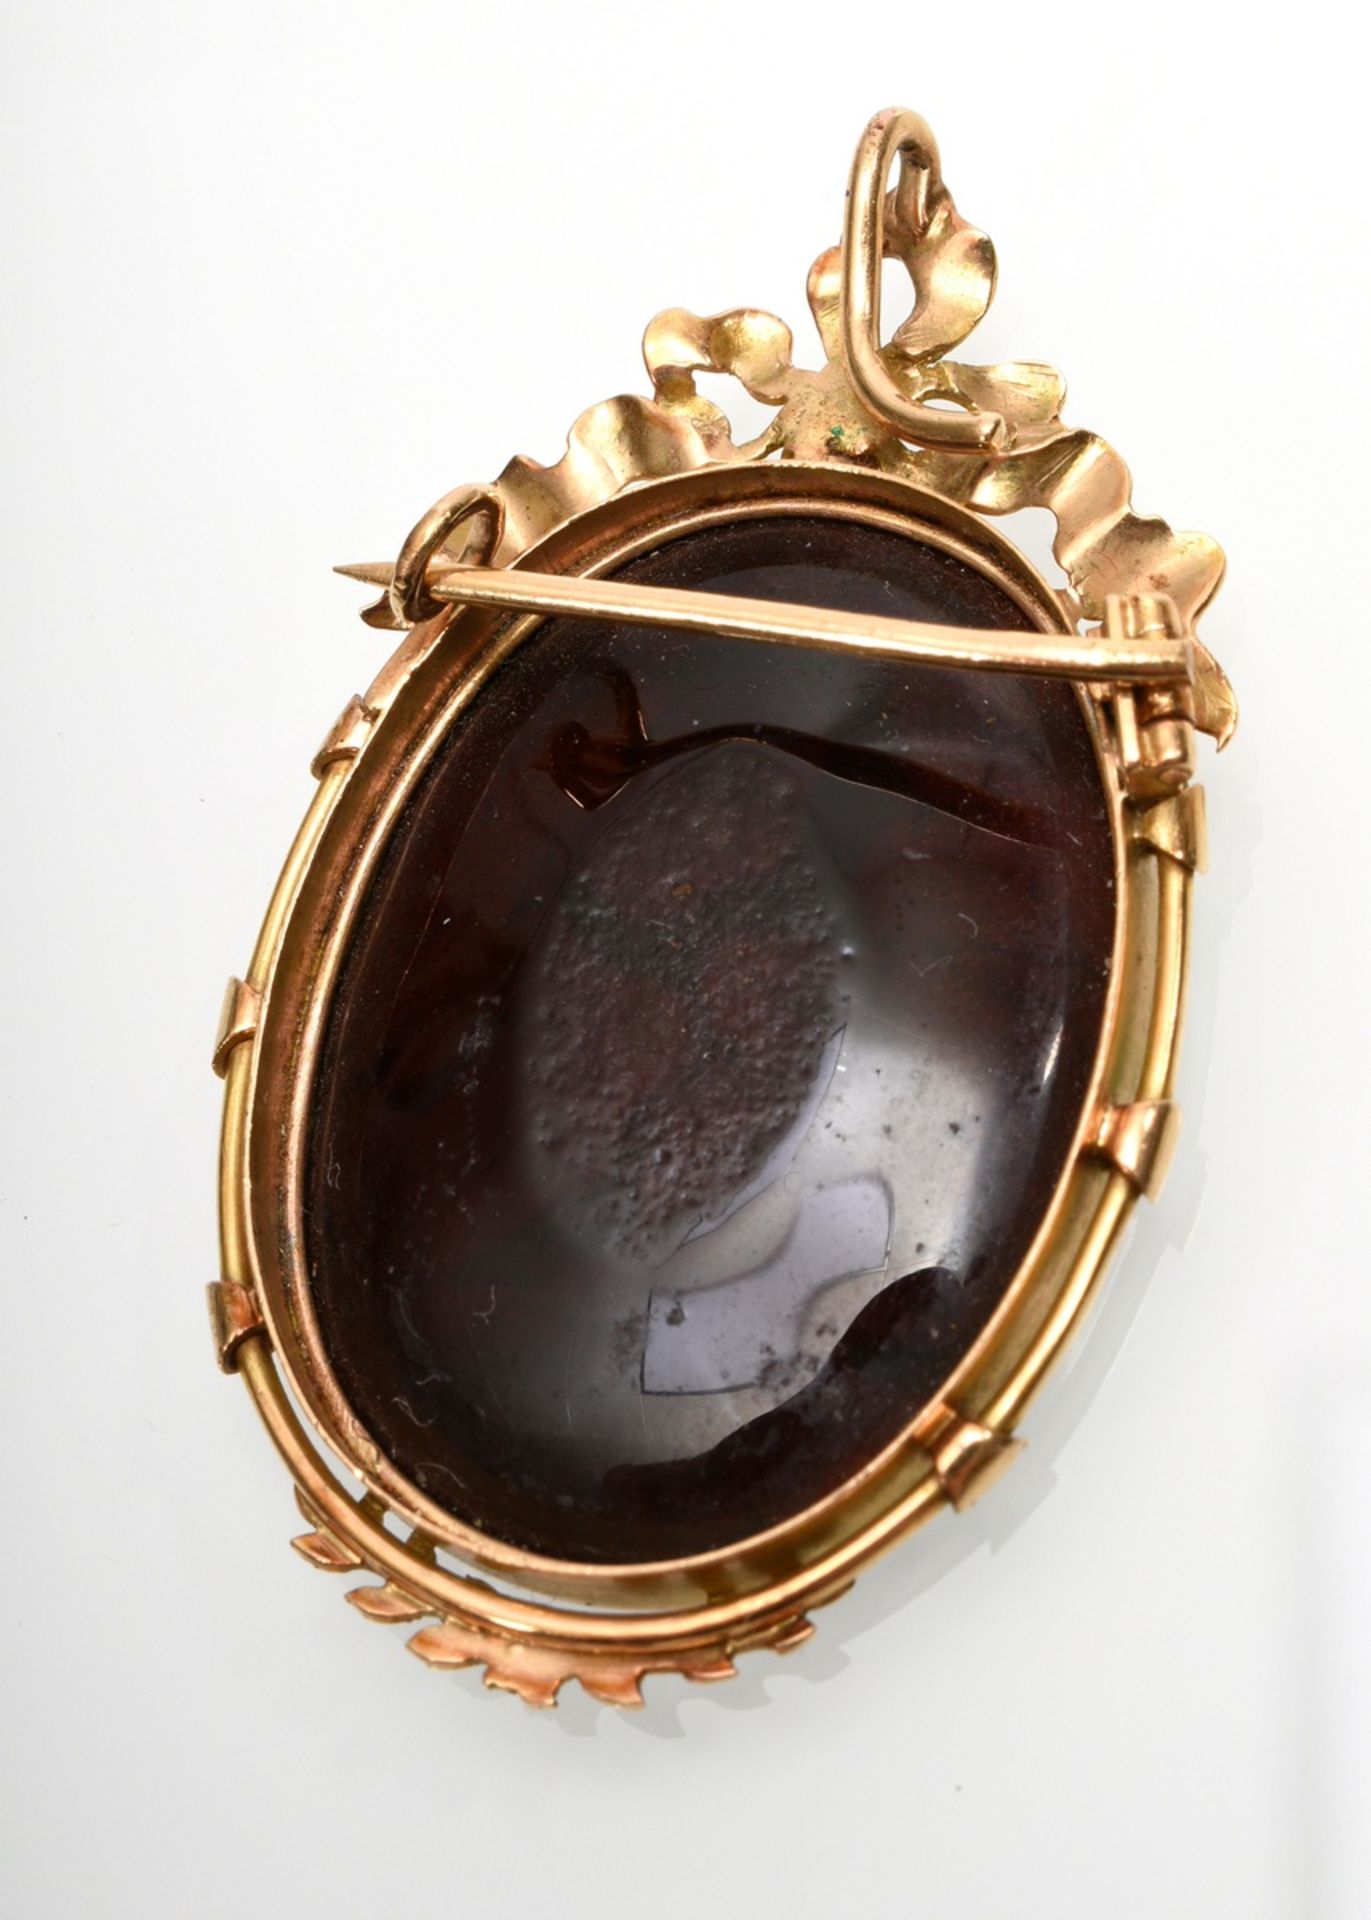 Delicate pink gold 585 pin pendant with fine enamel painting "Putto" on brown background, circa 189 - Image 3 of 3